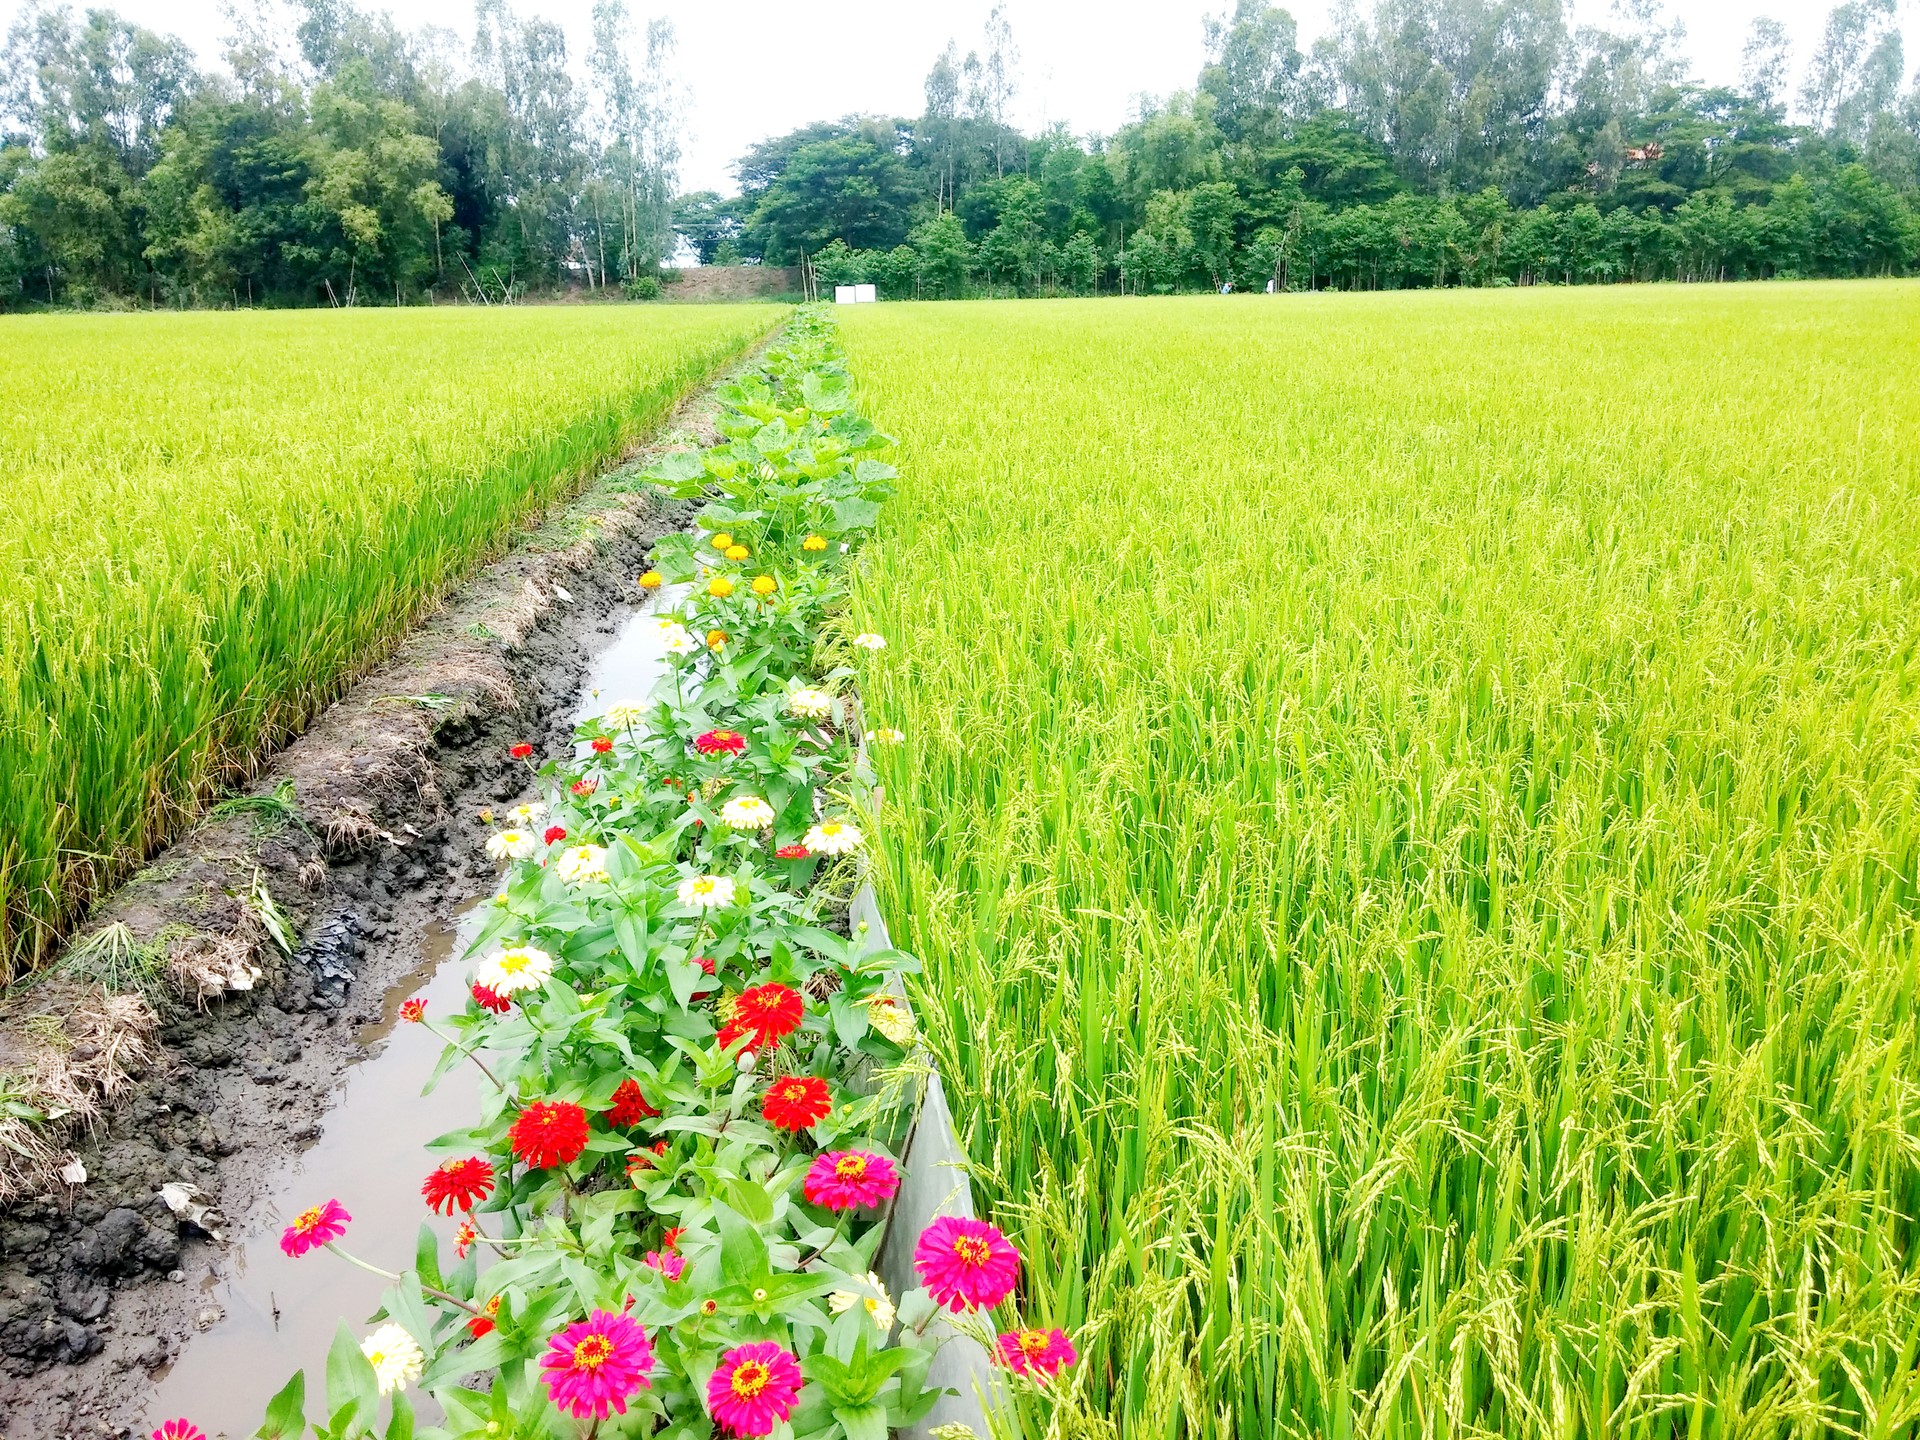 Flower bank-rice field is one of the models of integrated pest management that are easy to implement, cost-effective, and effective.